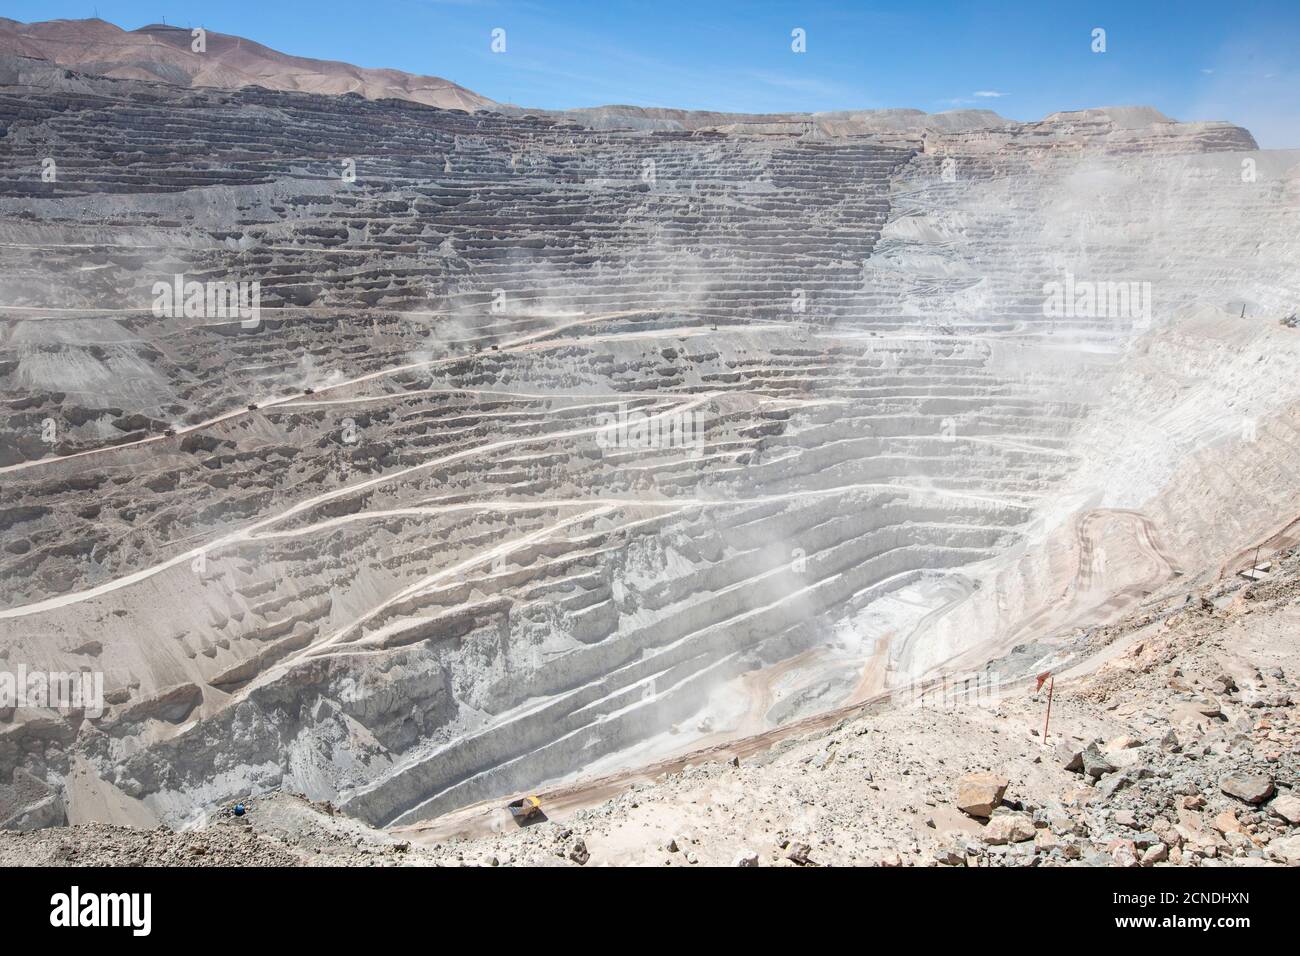 Huge machinery working the Chuquicamata open pit copper mine, the largest by volume in the world, Chile Stock Photo